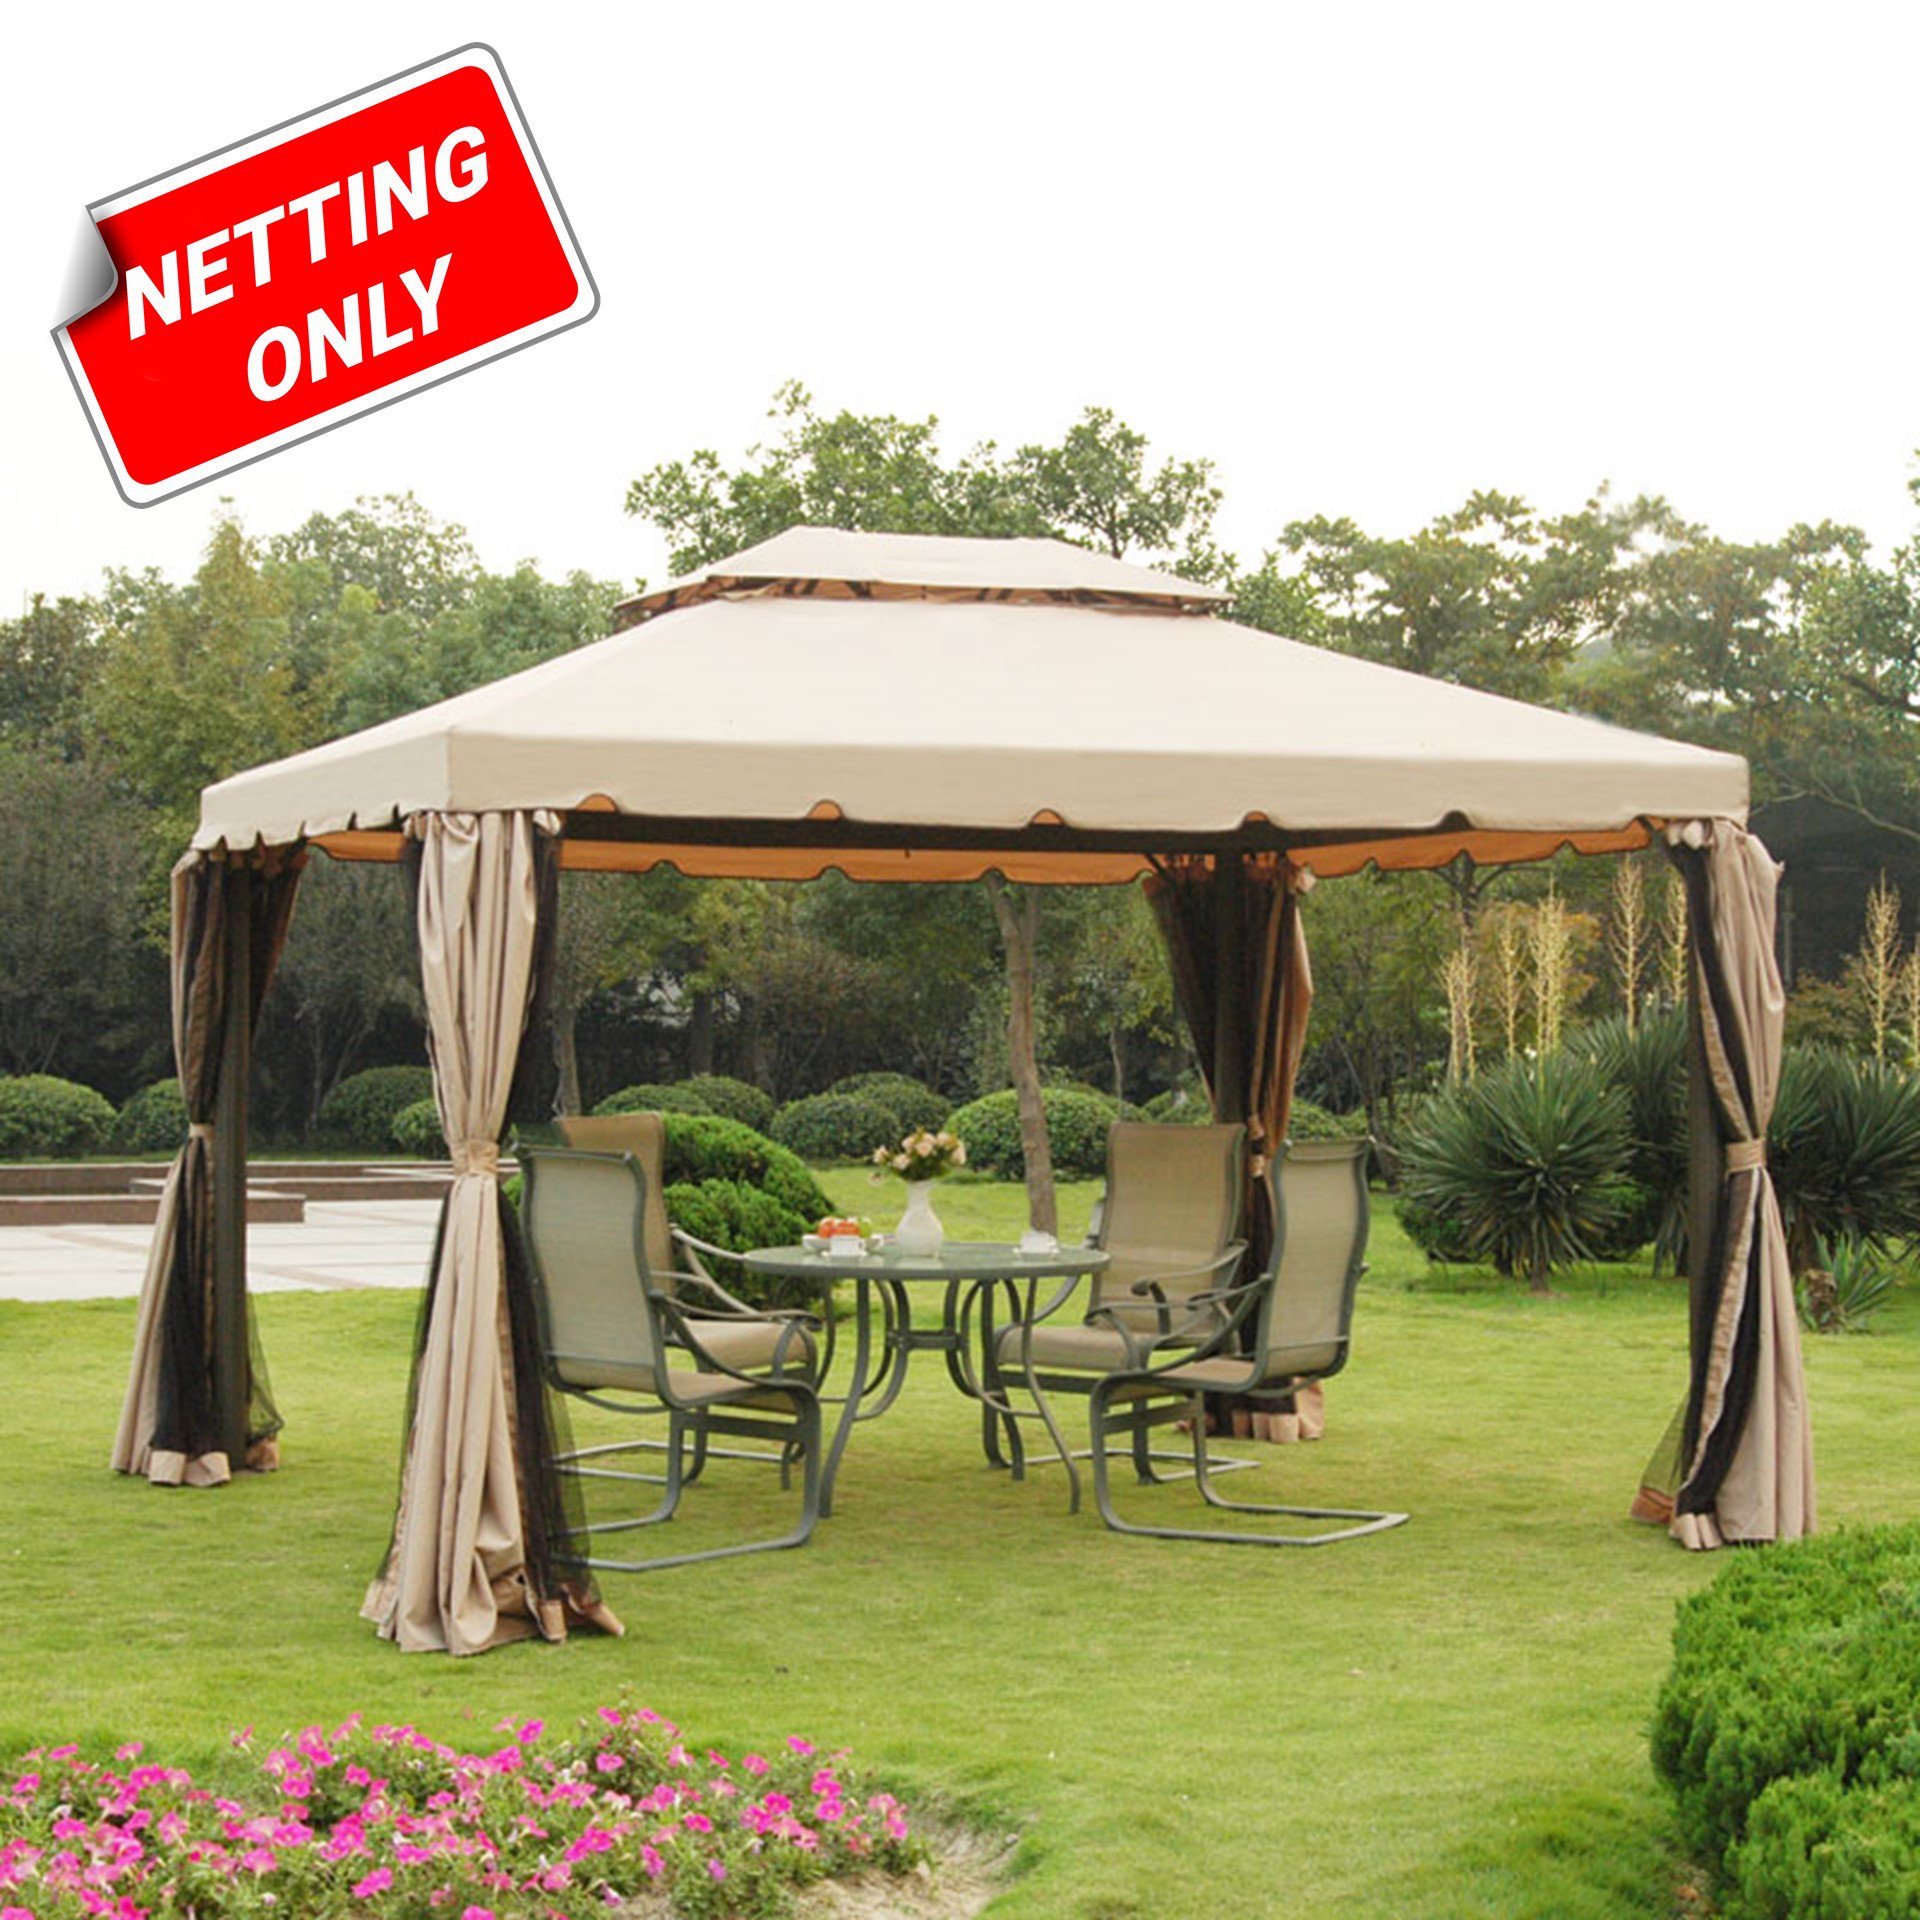 Sunjoy Replacement Mosquito Netting for 10x12 ft Windsor Gazebo